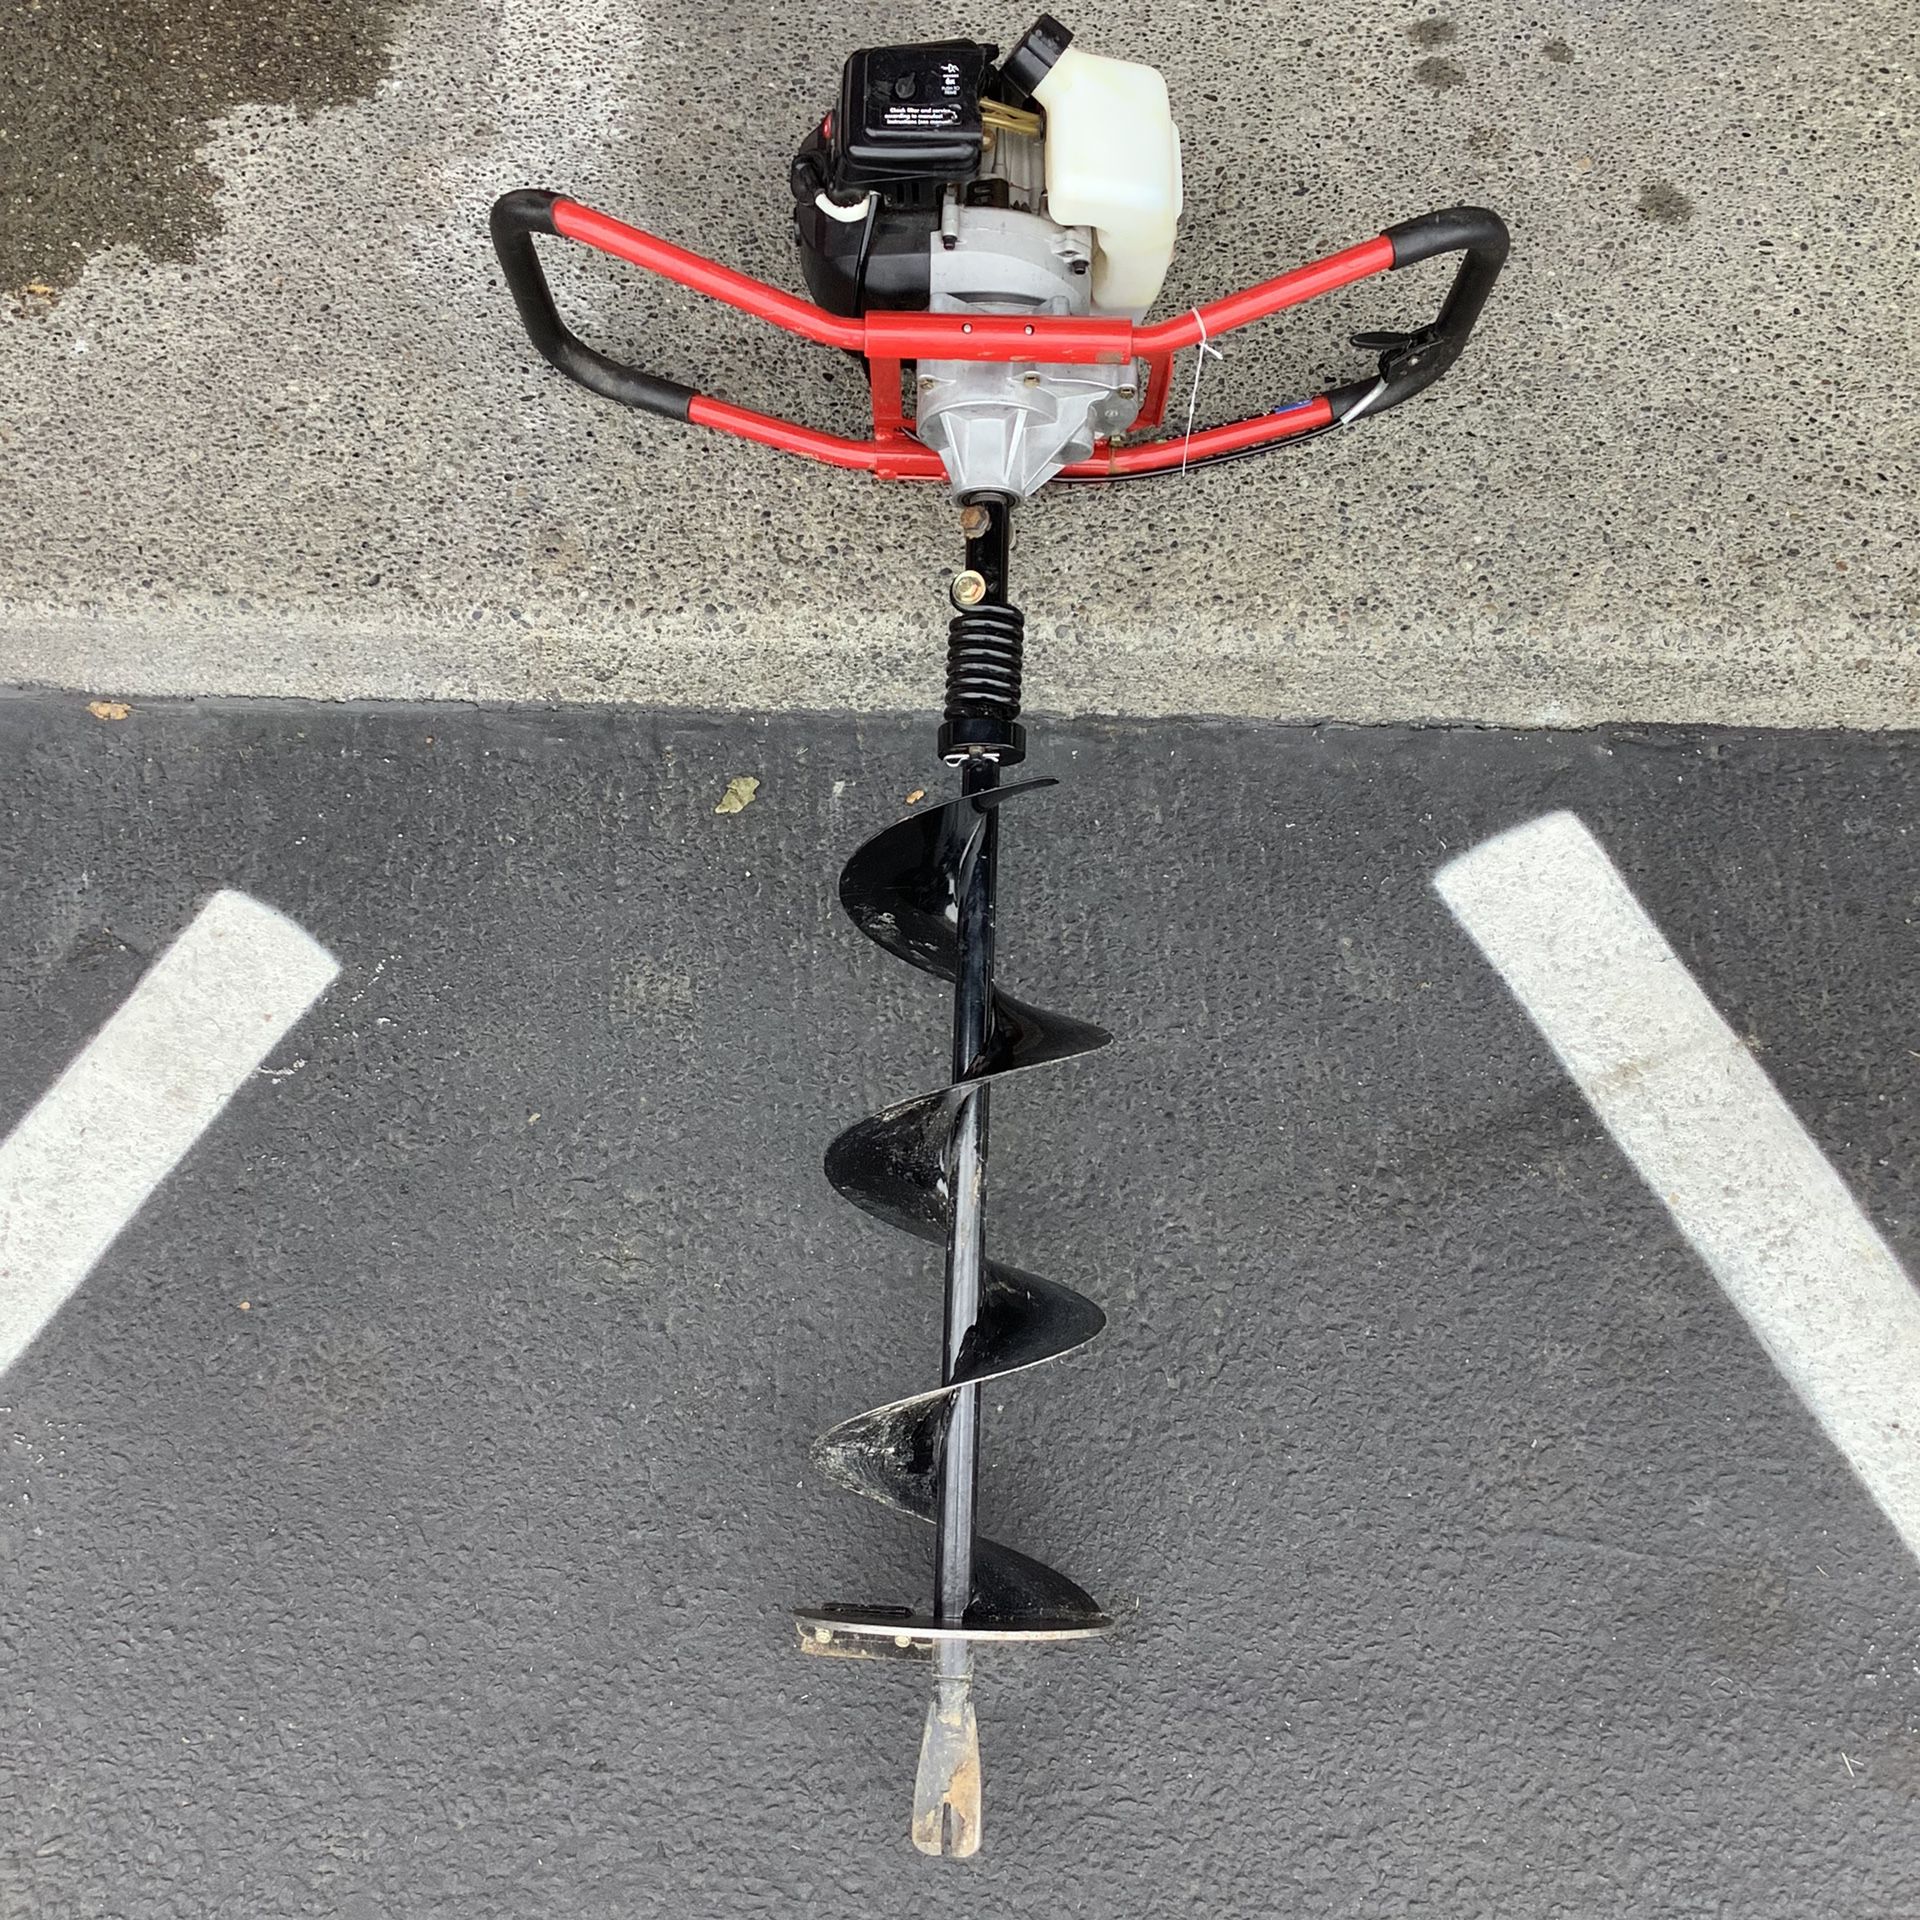 South Land / Southland 43cc Earth Auger Powerhead